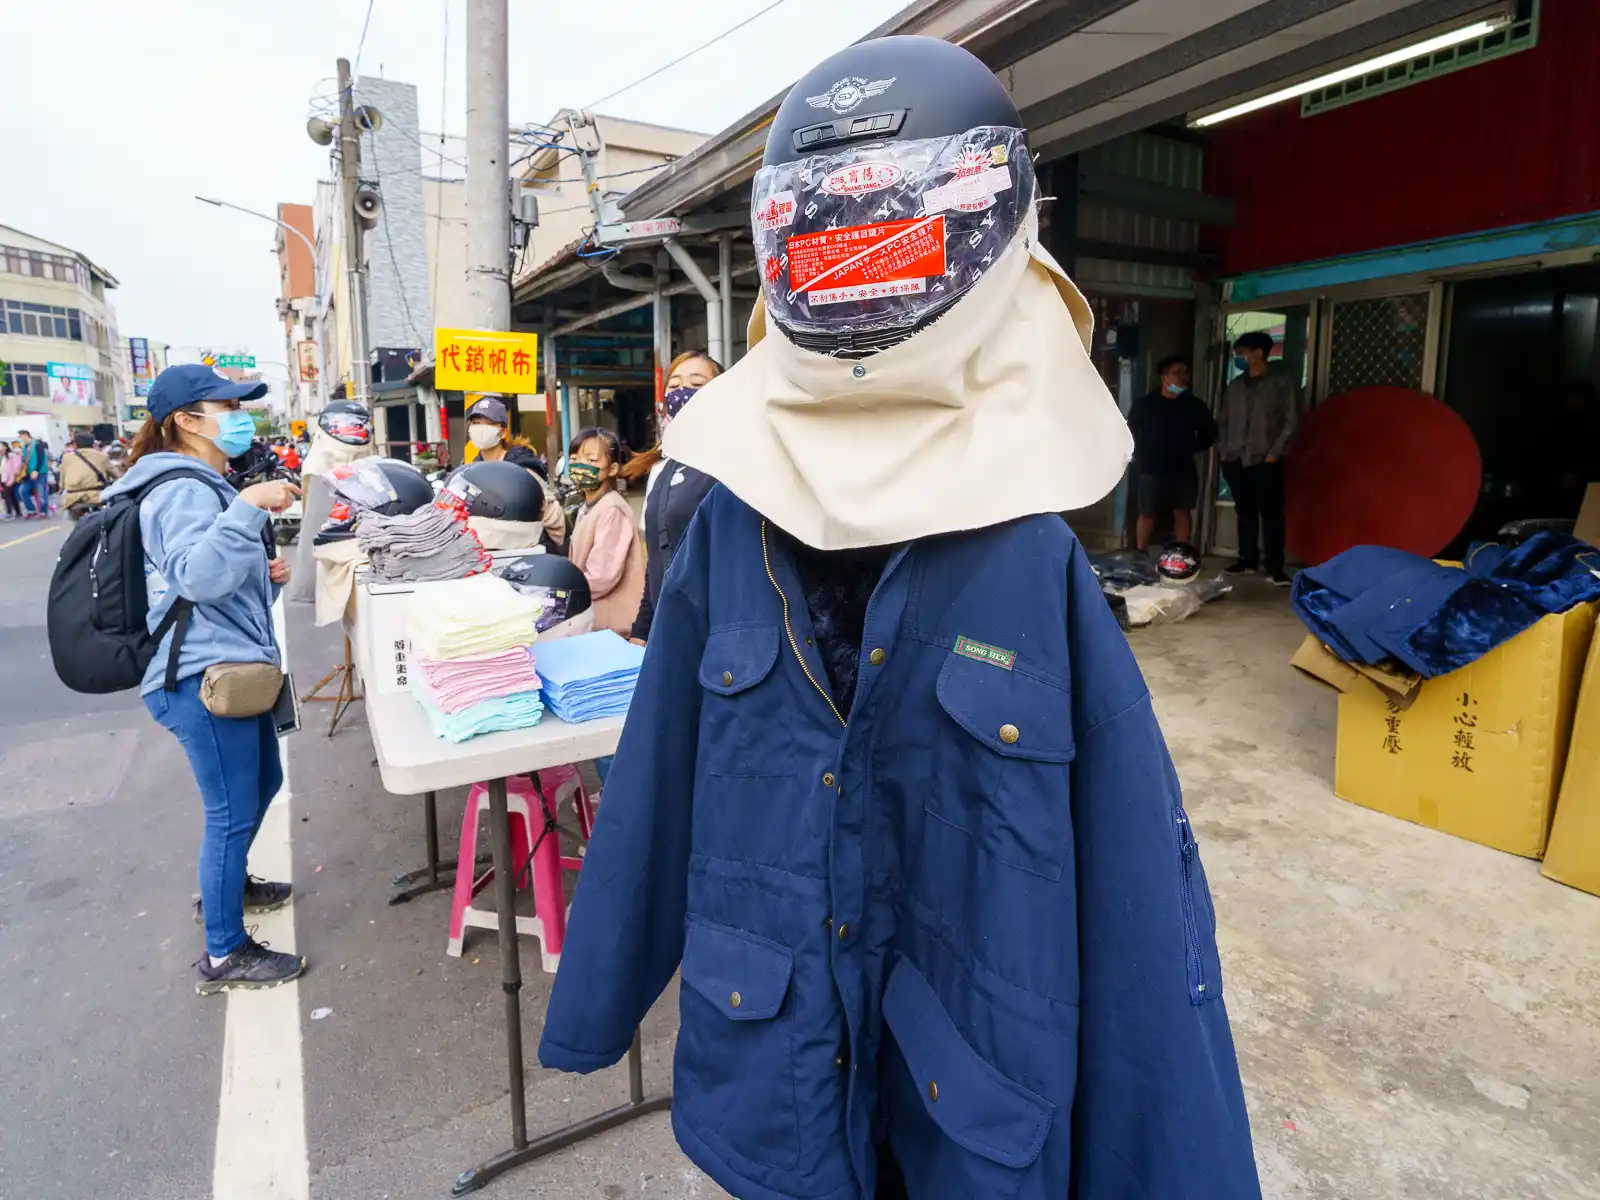 Thick jackets, neck protectors, and motorcycles helmets that are meant to be worn as protection are on sale in Yanshui just before the event.